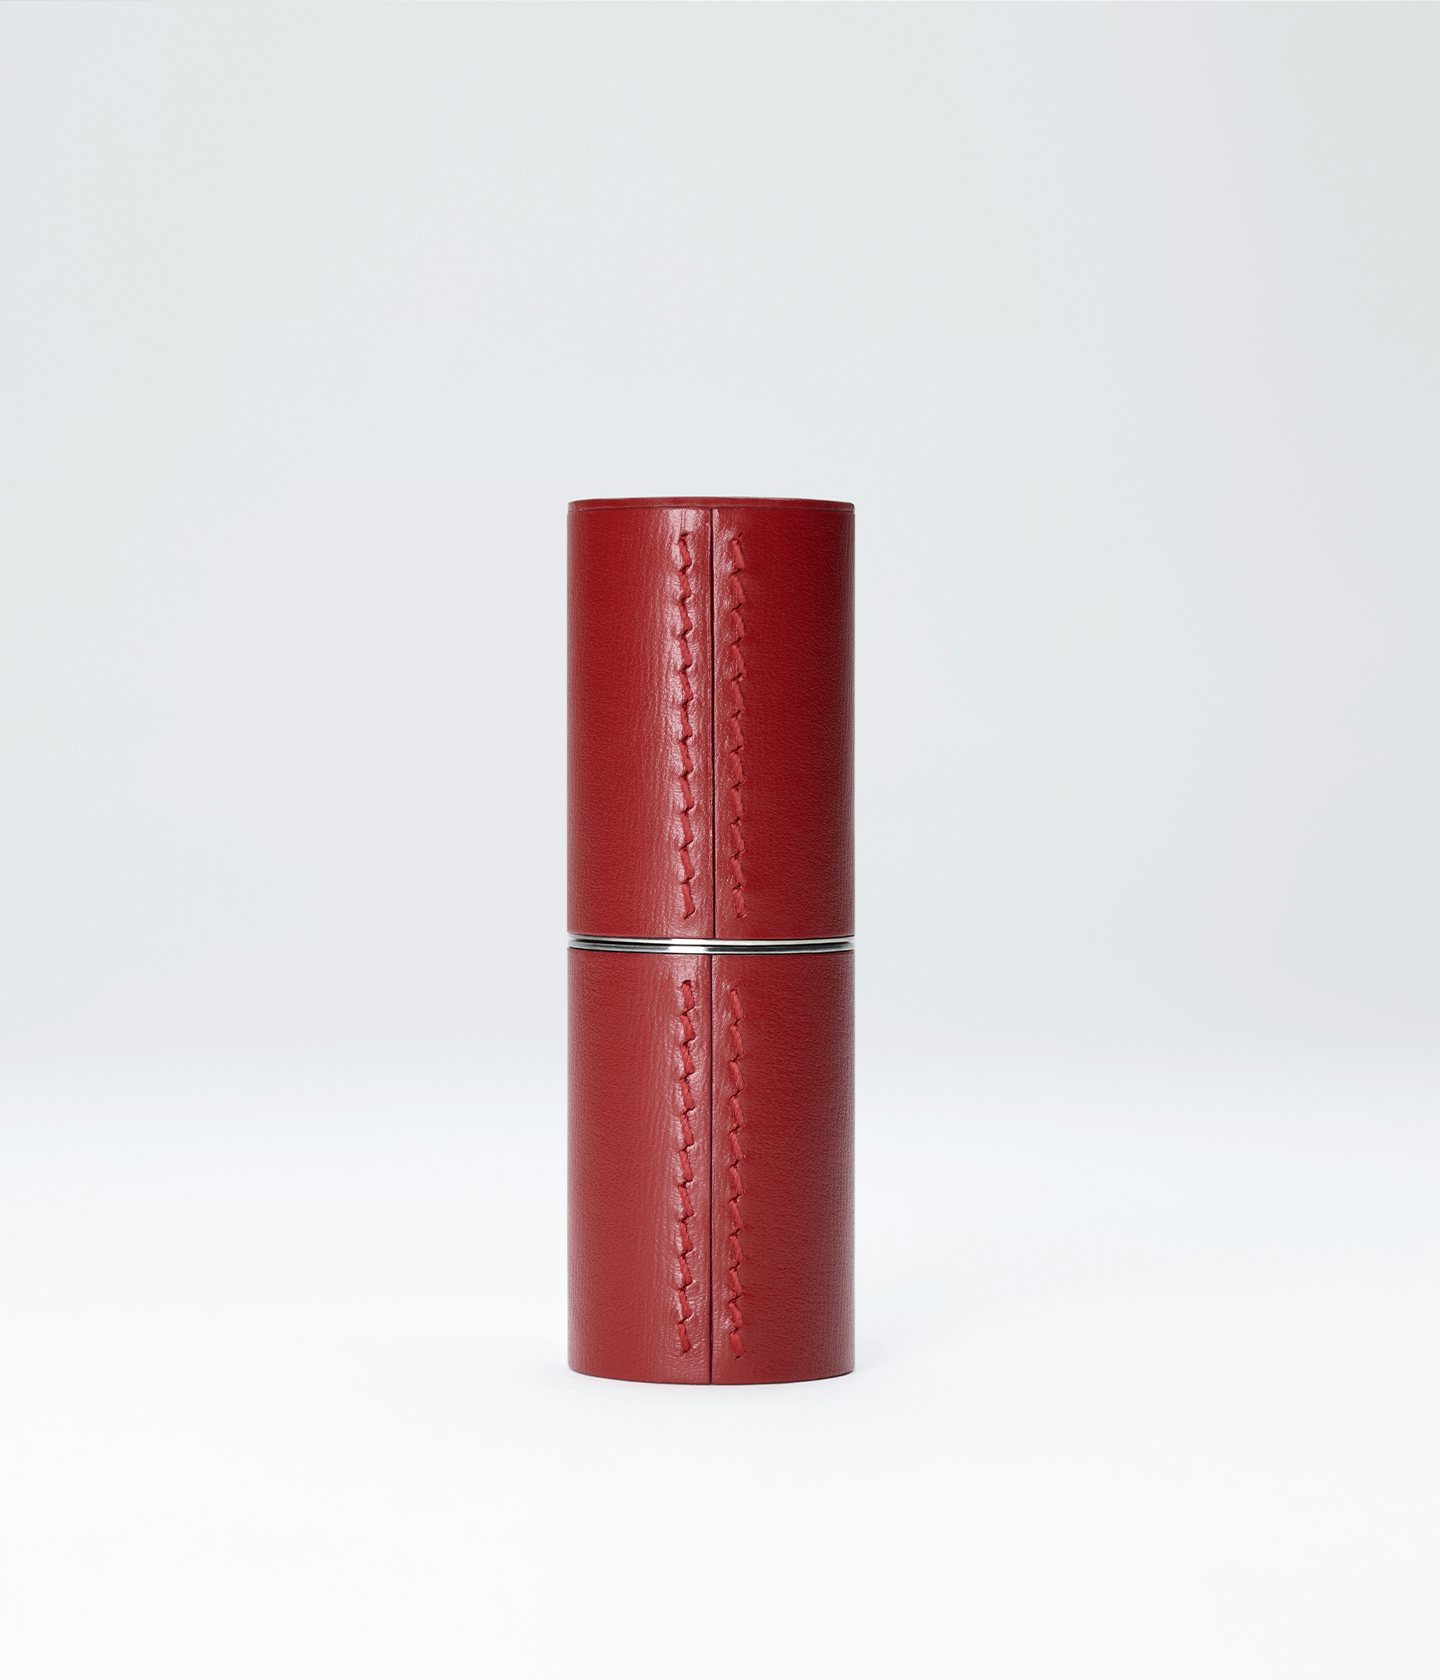 La bouche rouge The Iconic Peach Balm in the red paper case